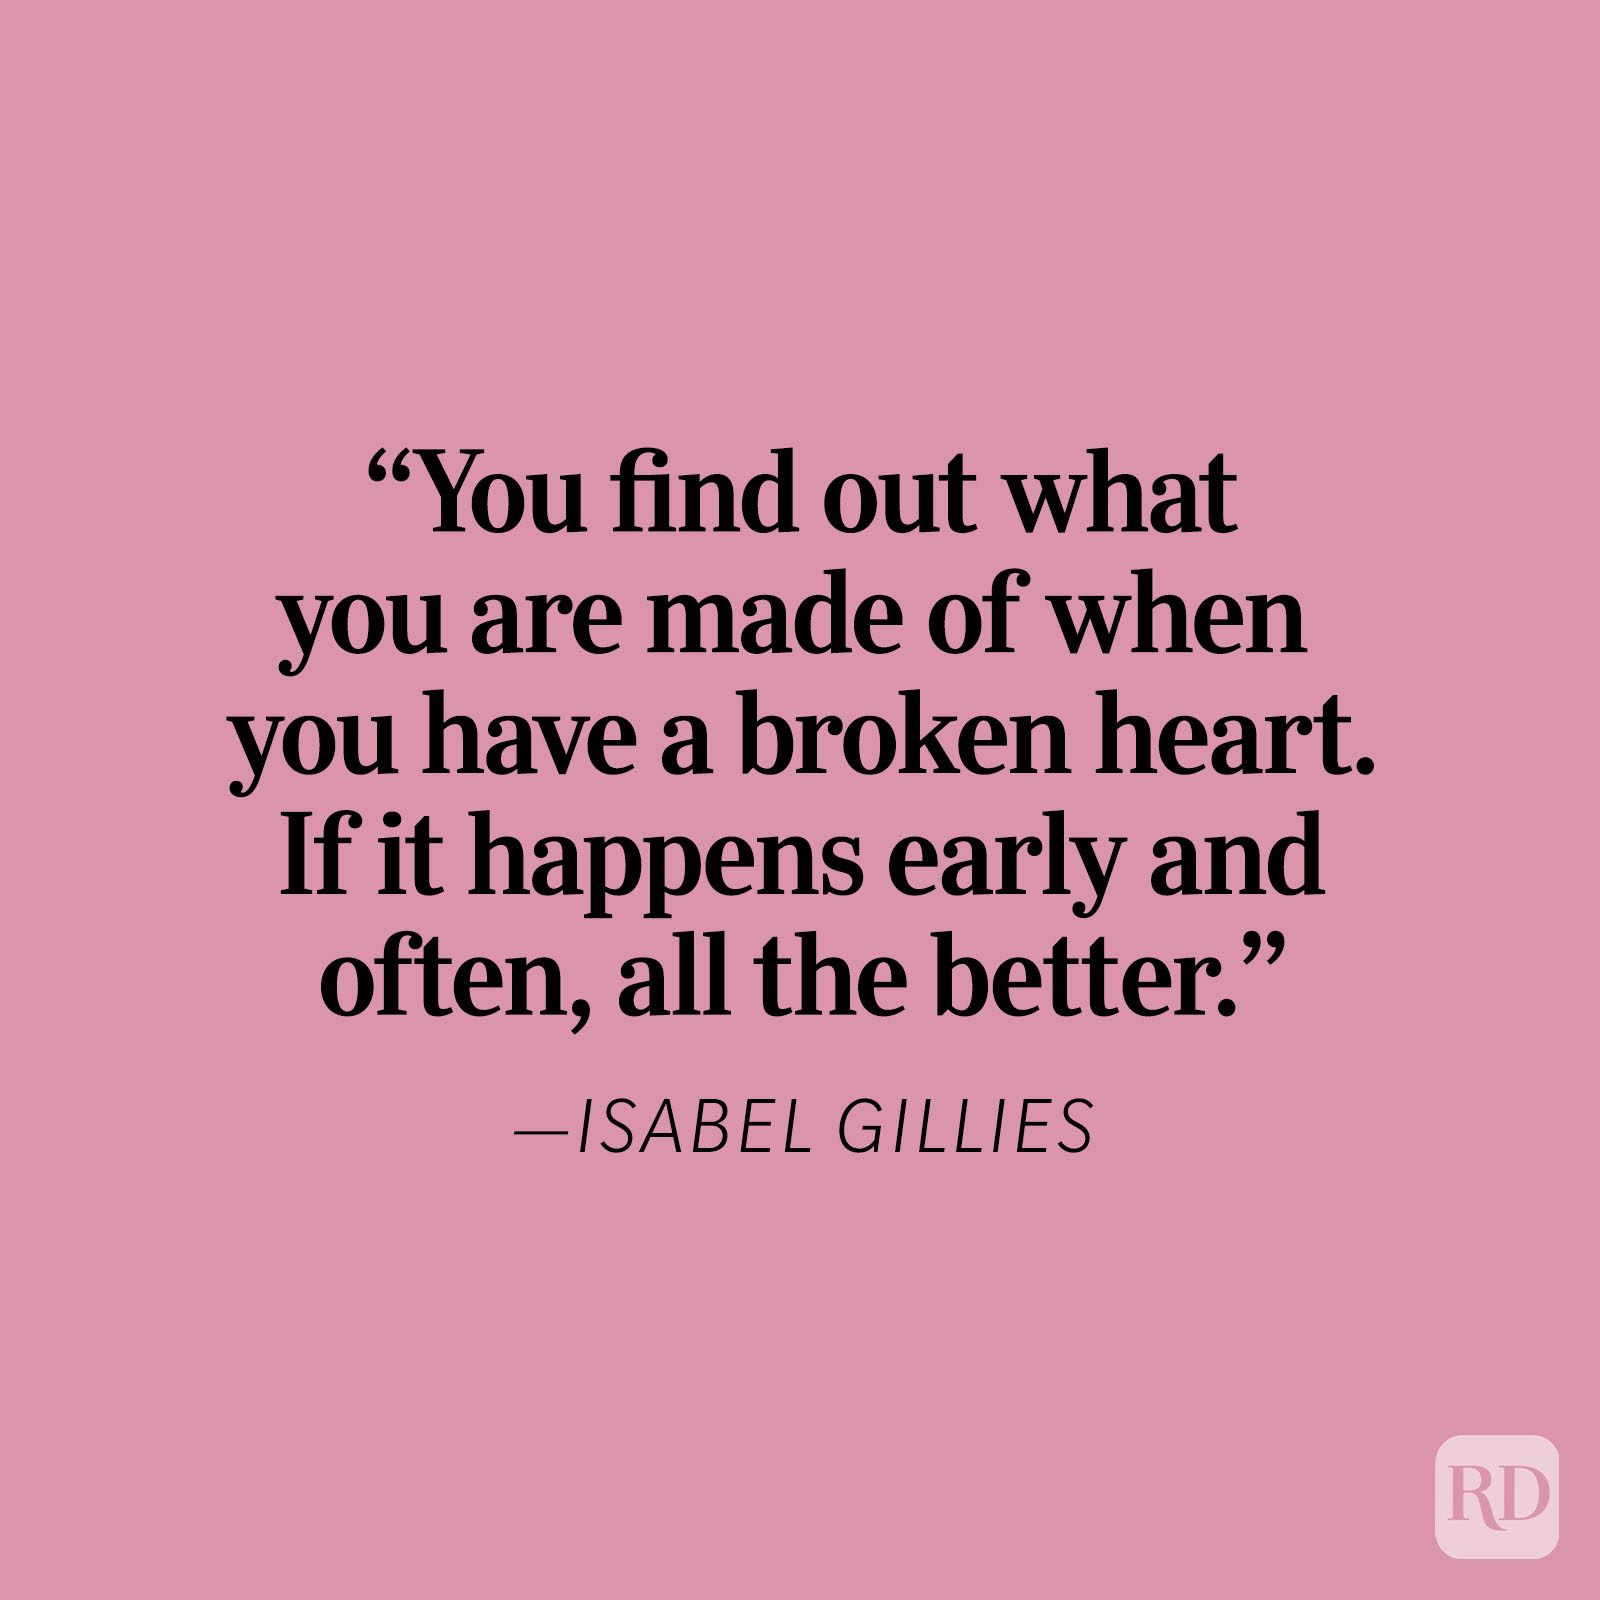 51 Broken Heart Quotes to Mend Your Heart and Help You Move Forward